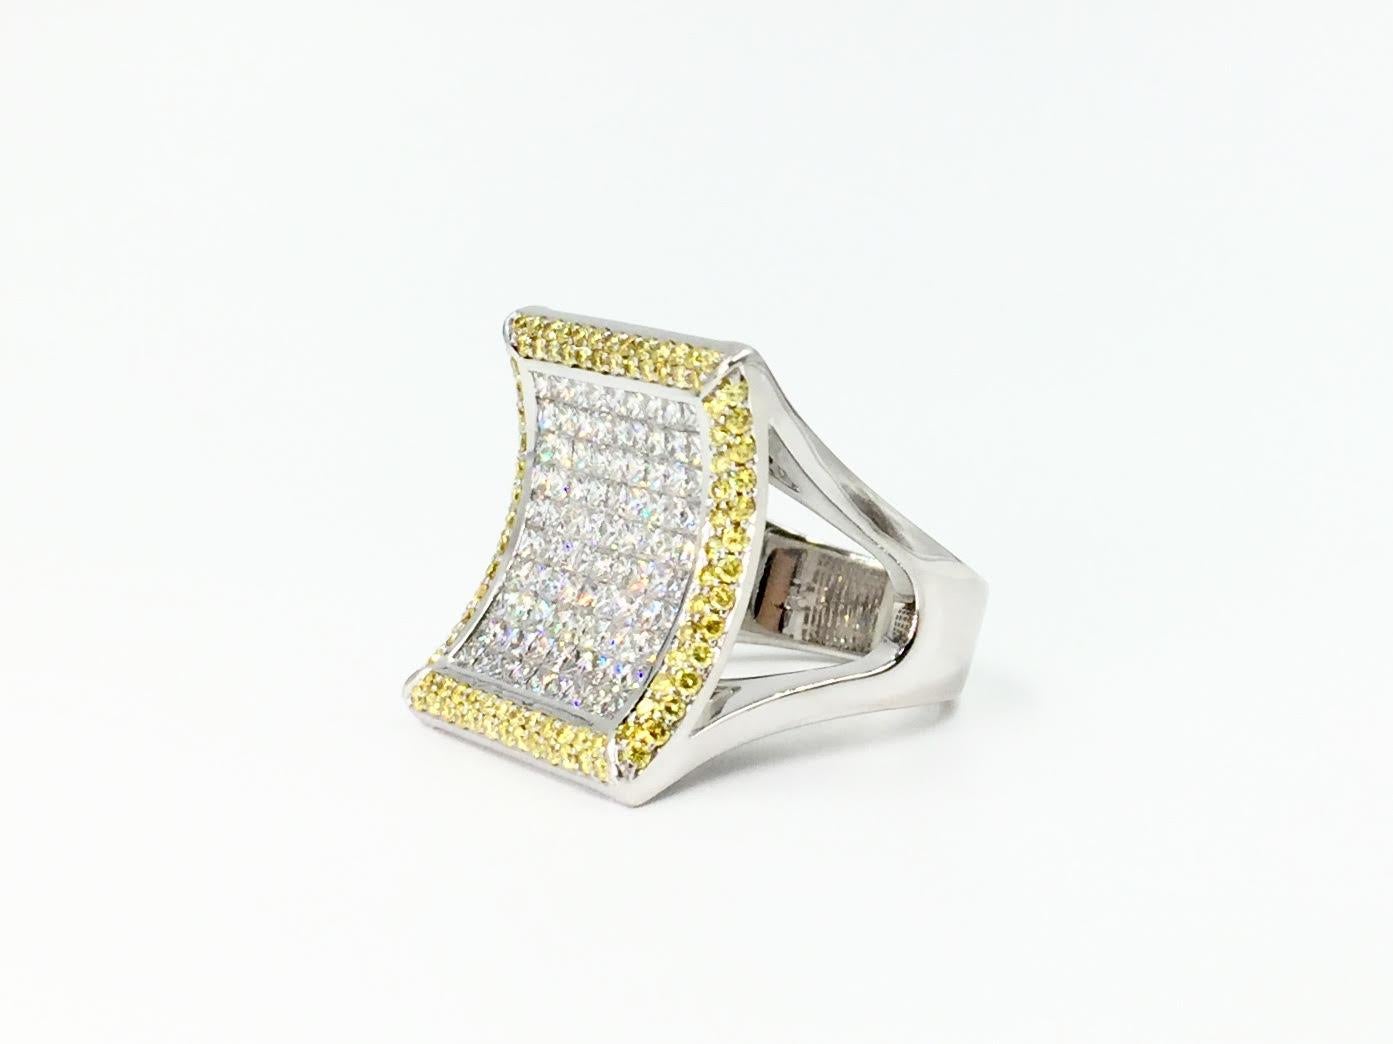 White and Yellow Diamond Large Curved Cocktail Ring by Sasha Primak In Excellent Condition For Sale In Pikesville, MD